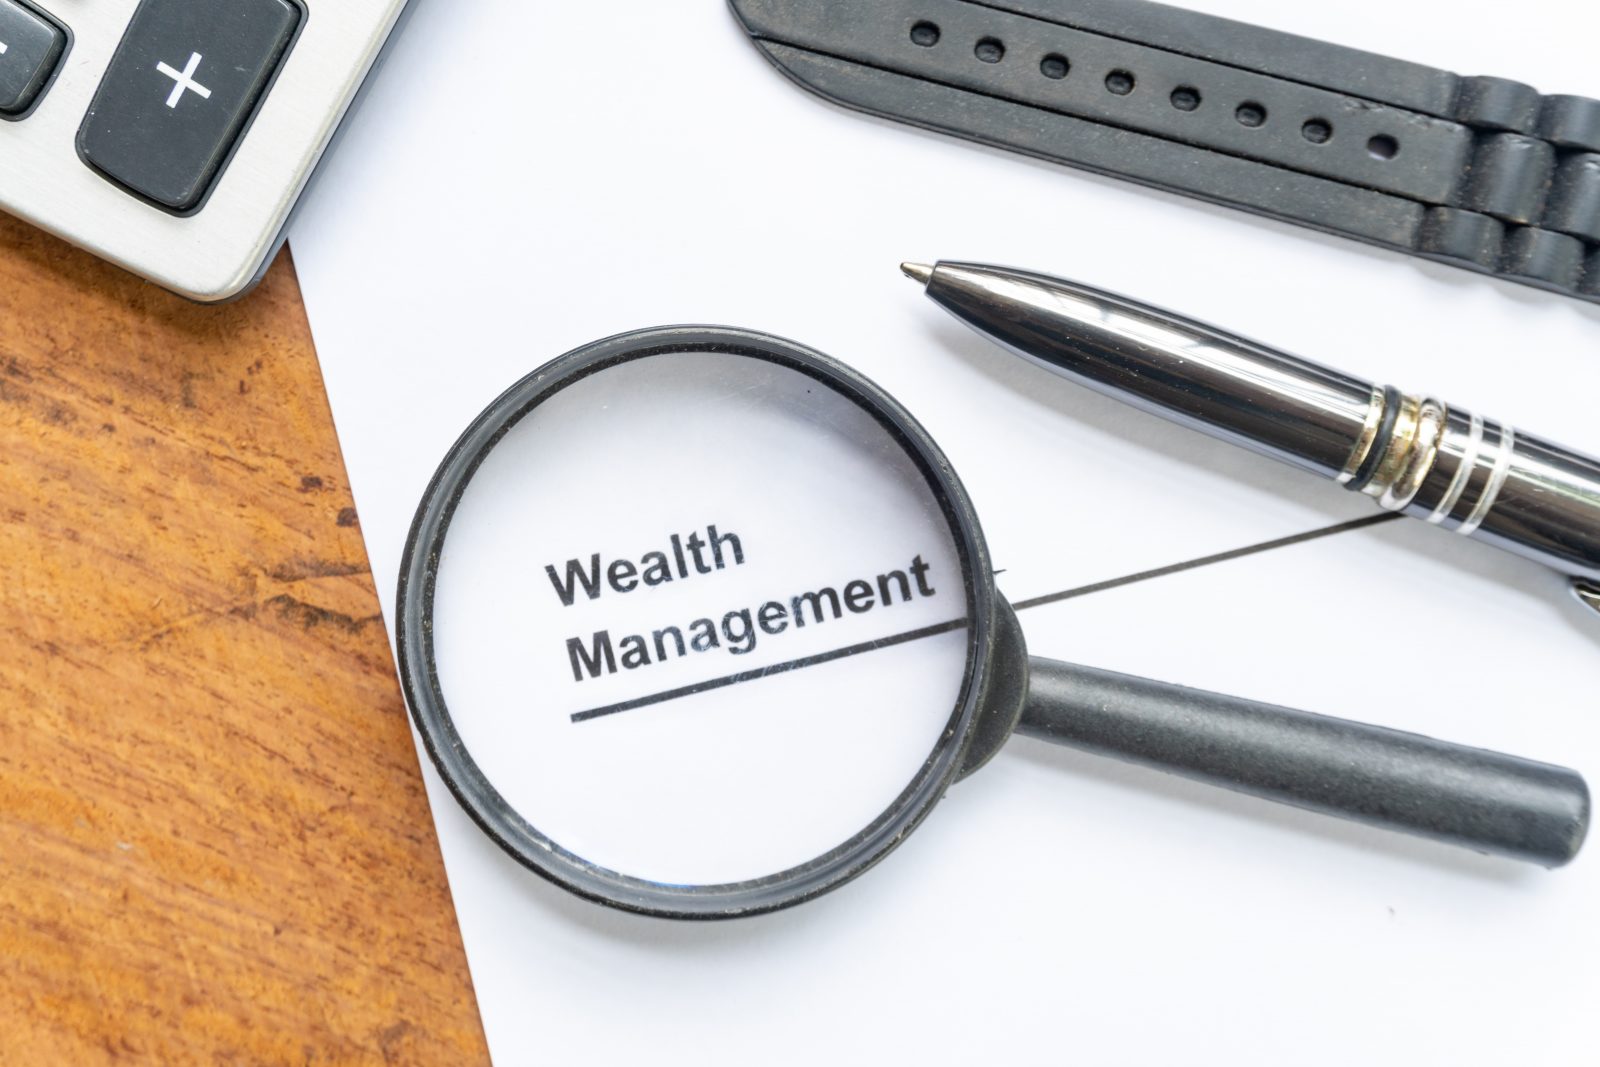 magnifying glass highlighting words "wealth management' typed on a paper